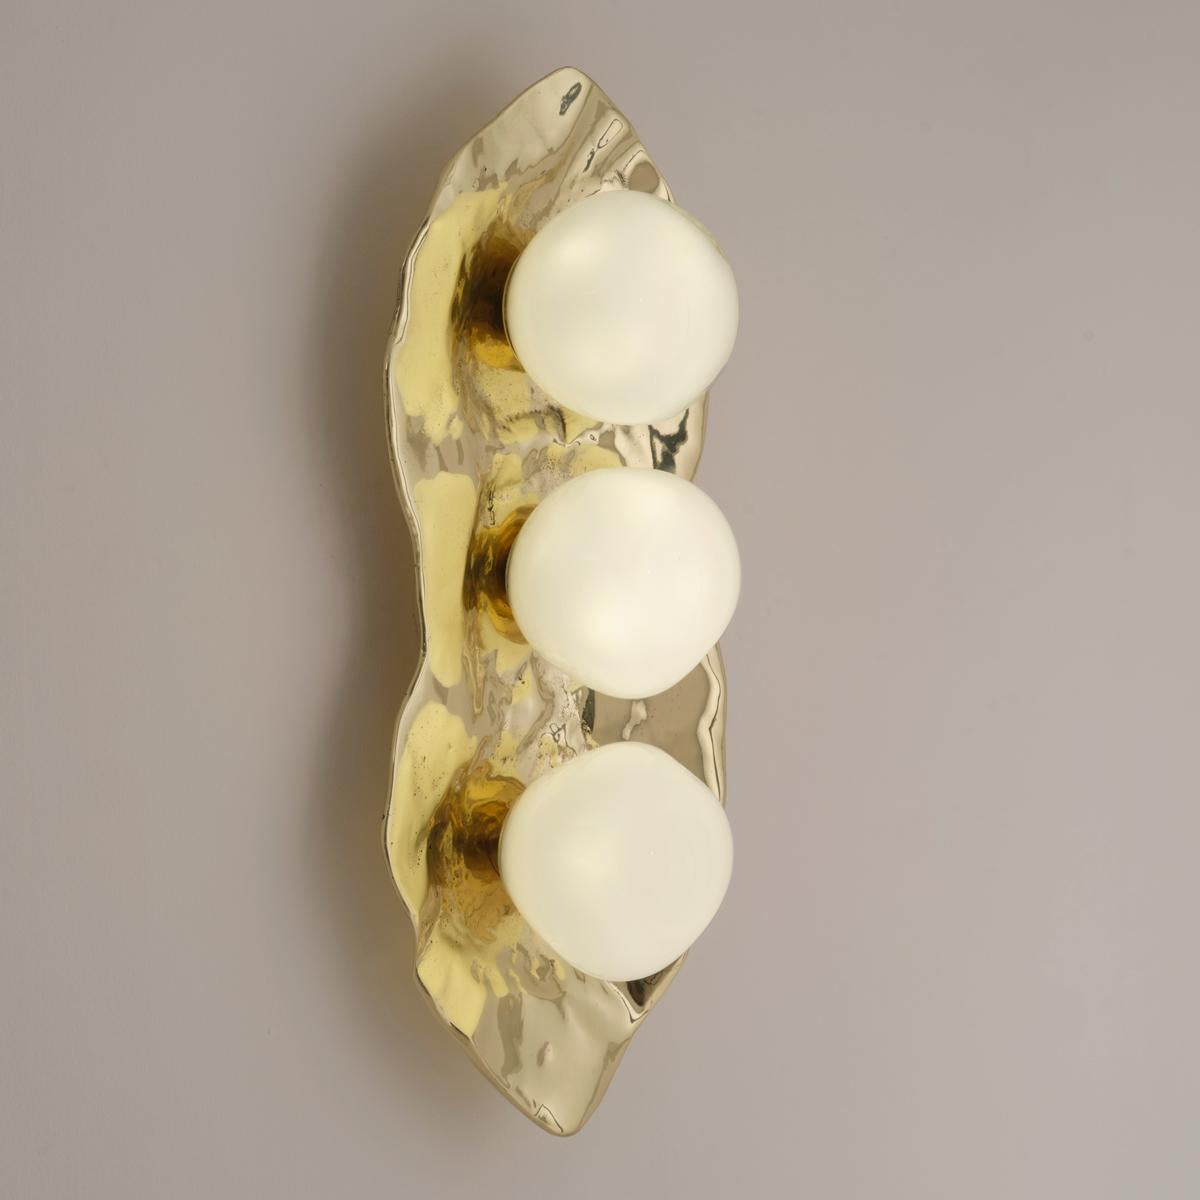 The Shell wall light is forged from brass to create an organic shell nestling three of our handblown Sfera glasses made in Murano.

Shown in the primary images in polished brass -subsequent pictures show the fixture in other featured